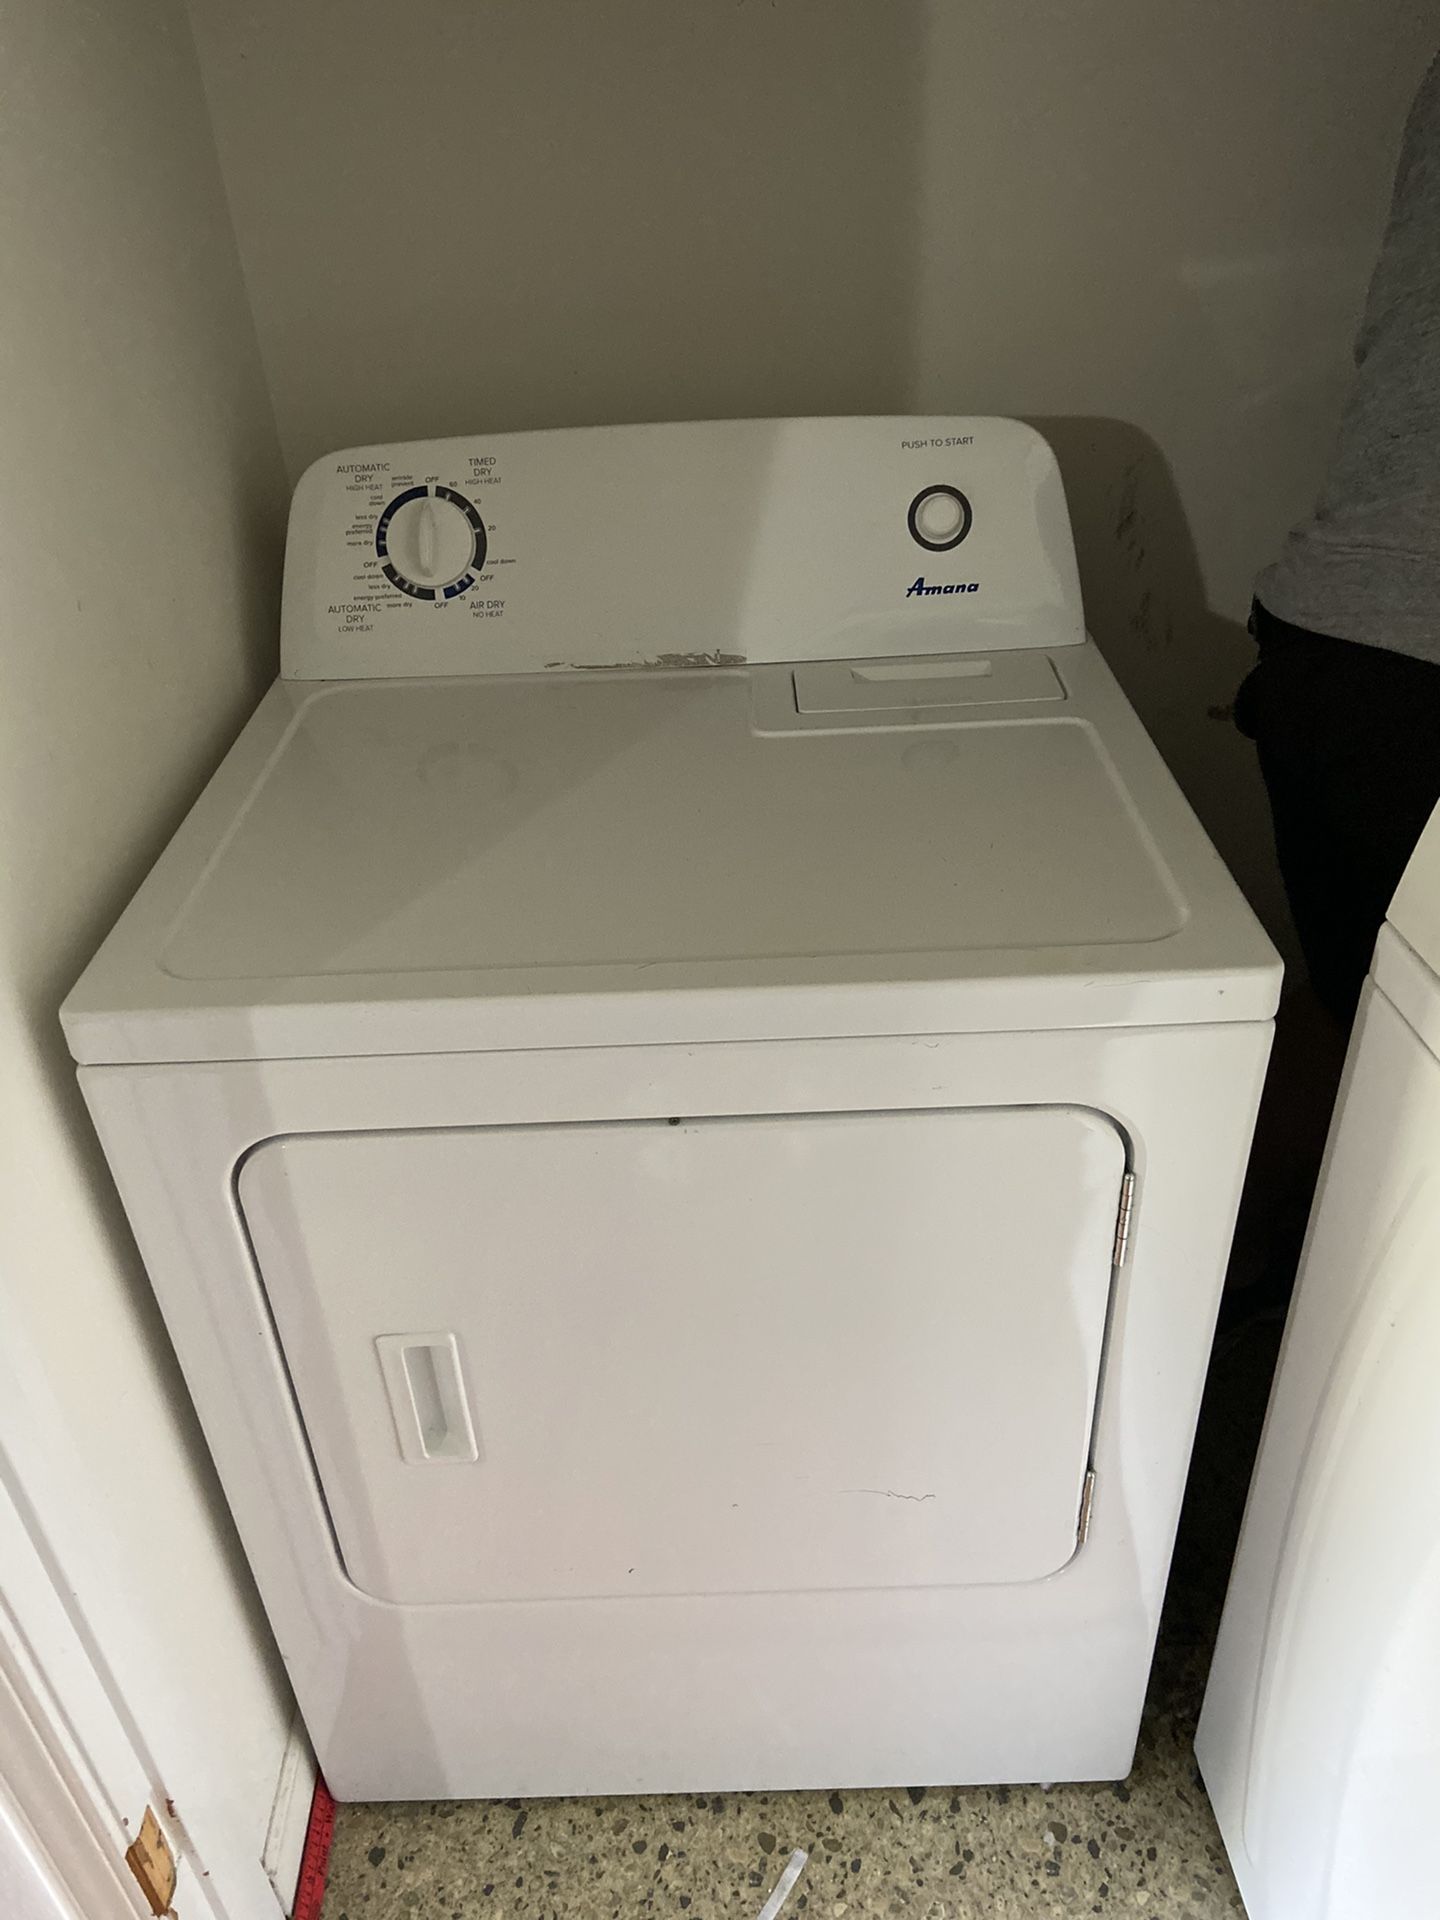 Amana Washer and Dryer Set - Needs to go ASAP